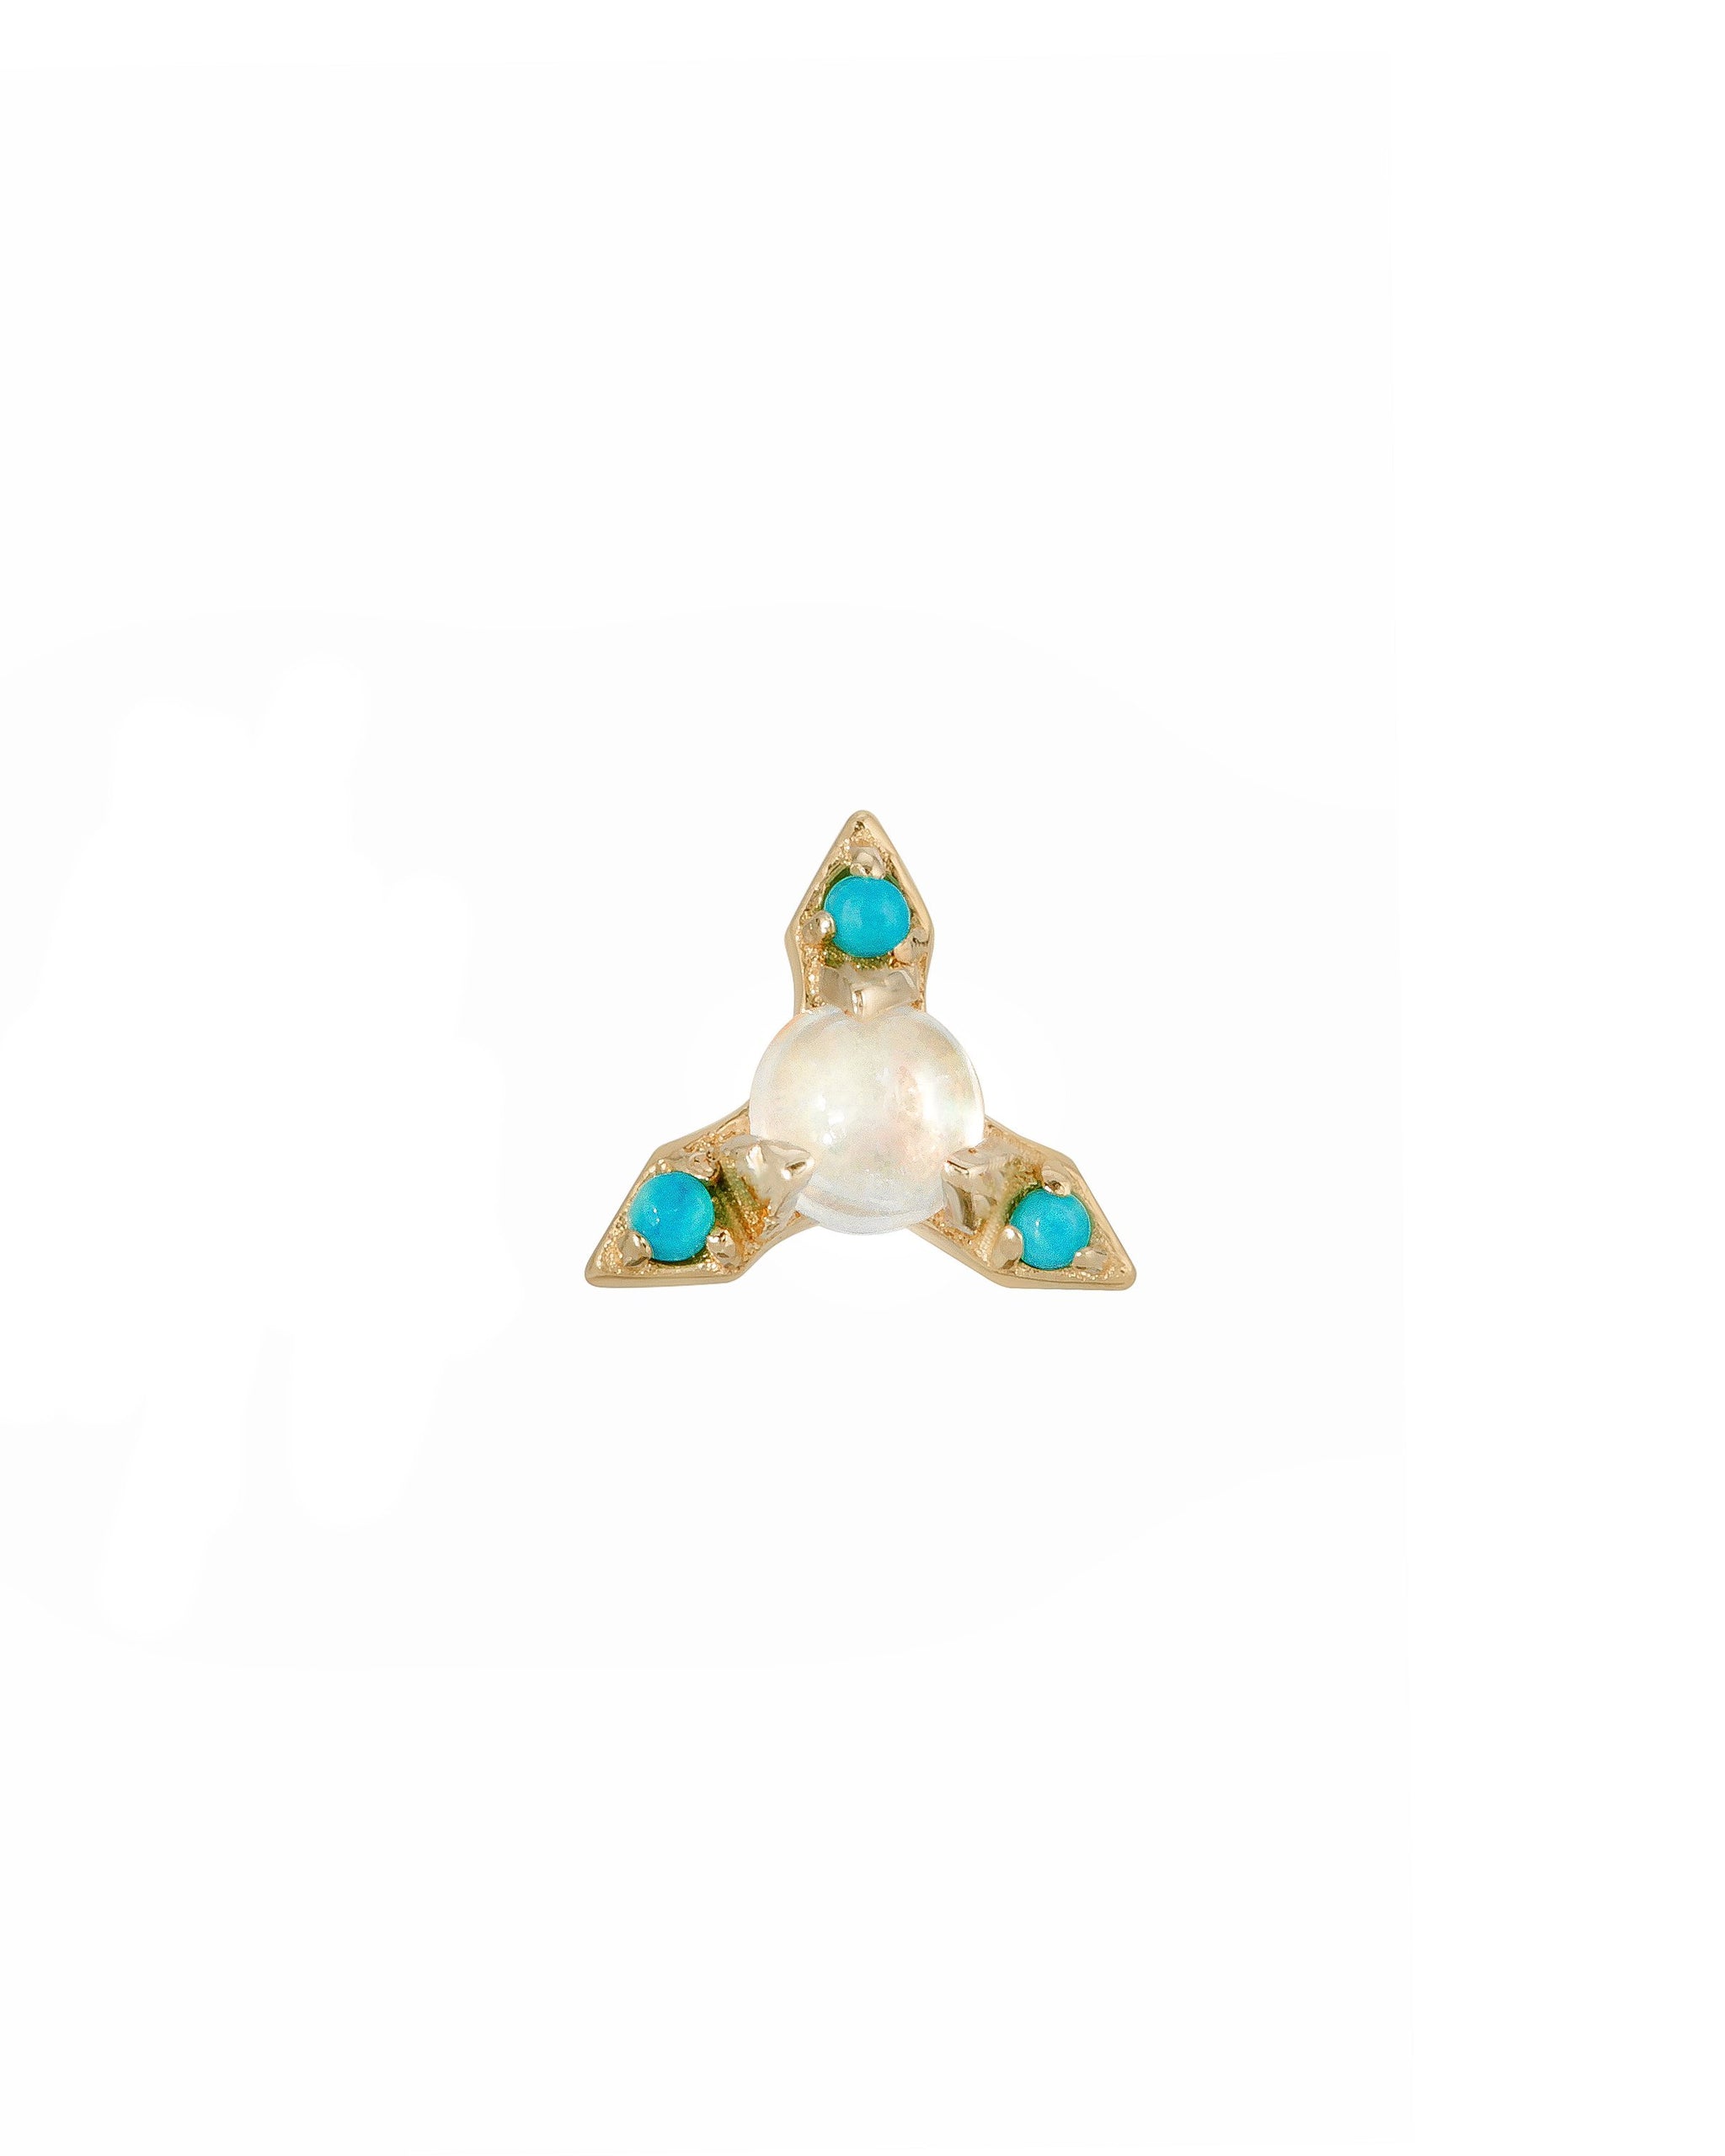 Nova Studs, 14k Yellow Gold, One 3mm Moonstone surrounded by three 1mm Sleeping Beauty Turquoise Stones, Handmade by Turquoise + Tobacco